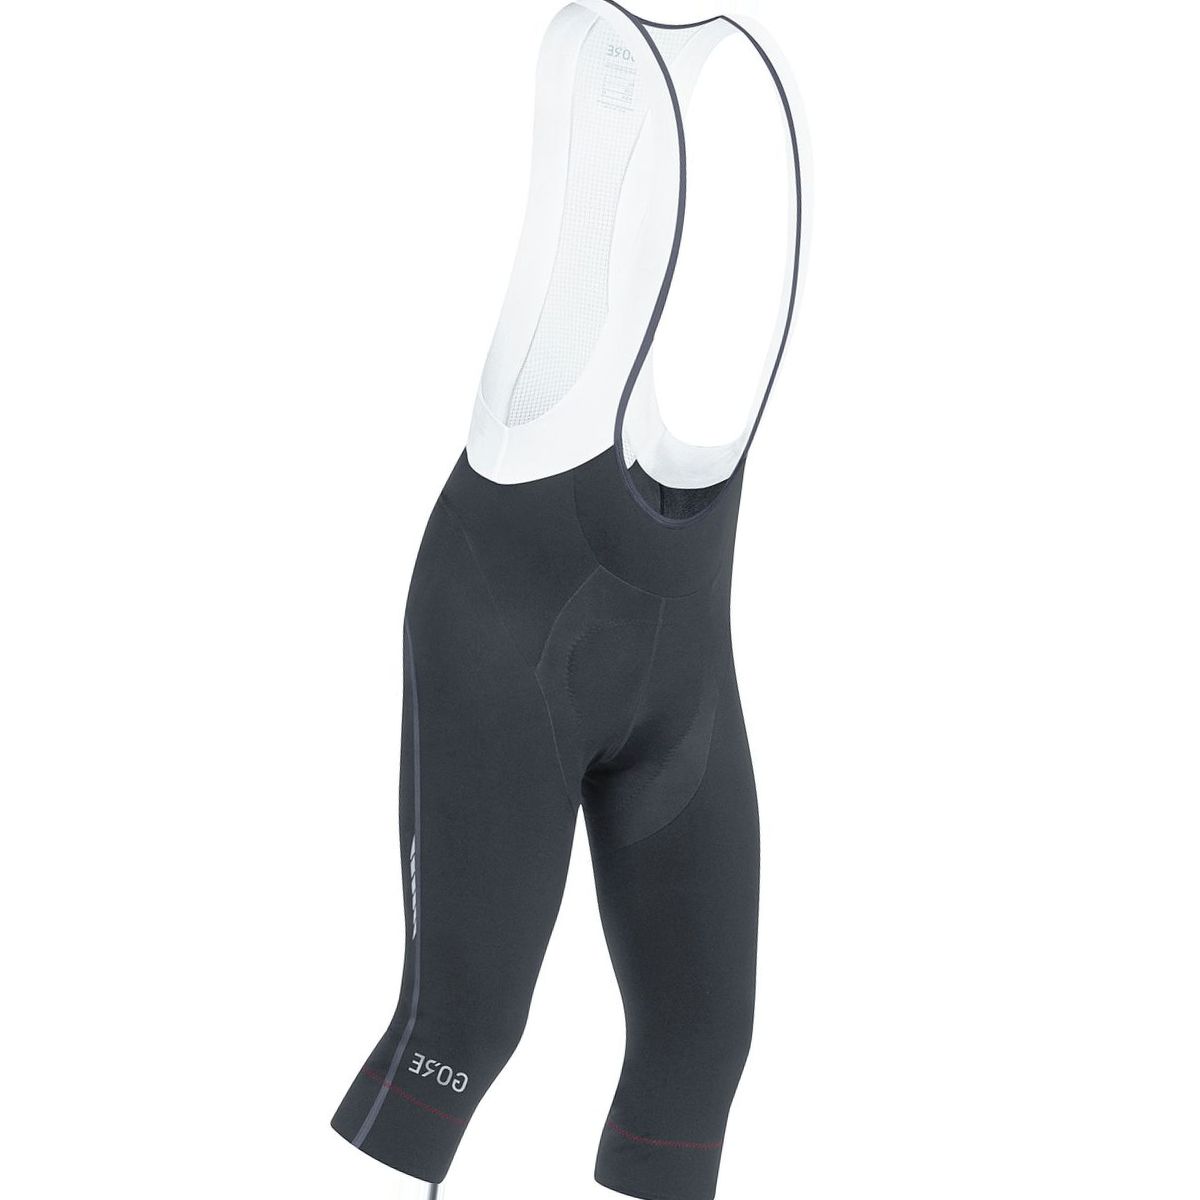 Gore Wear C7 Partial Thermo 3/4 Bib Shorts+ - Men's